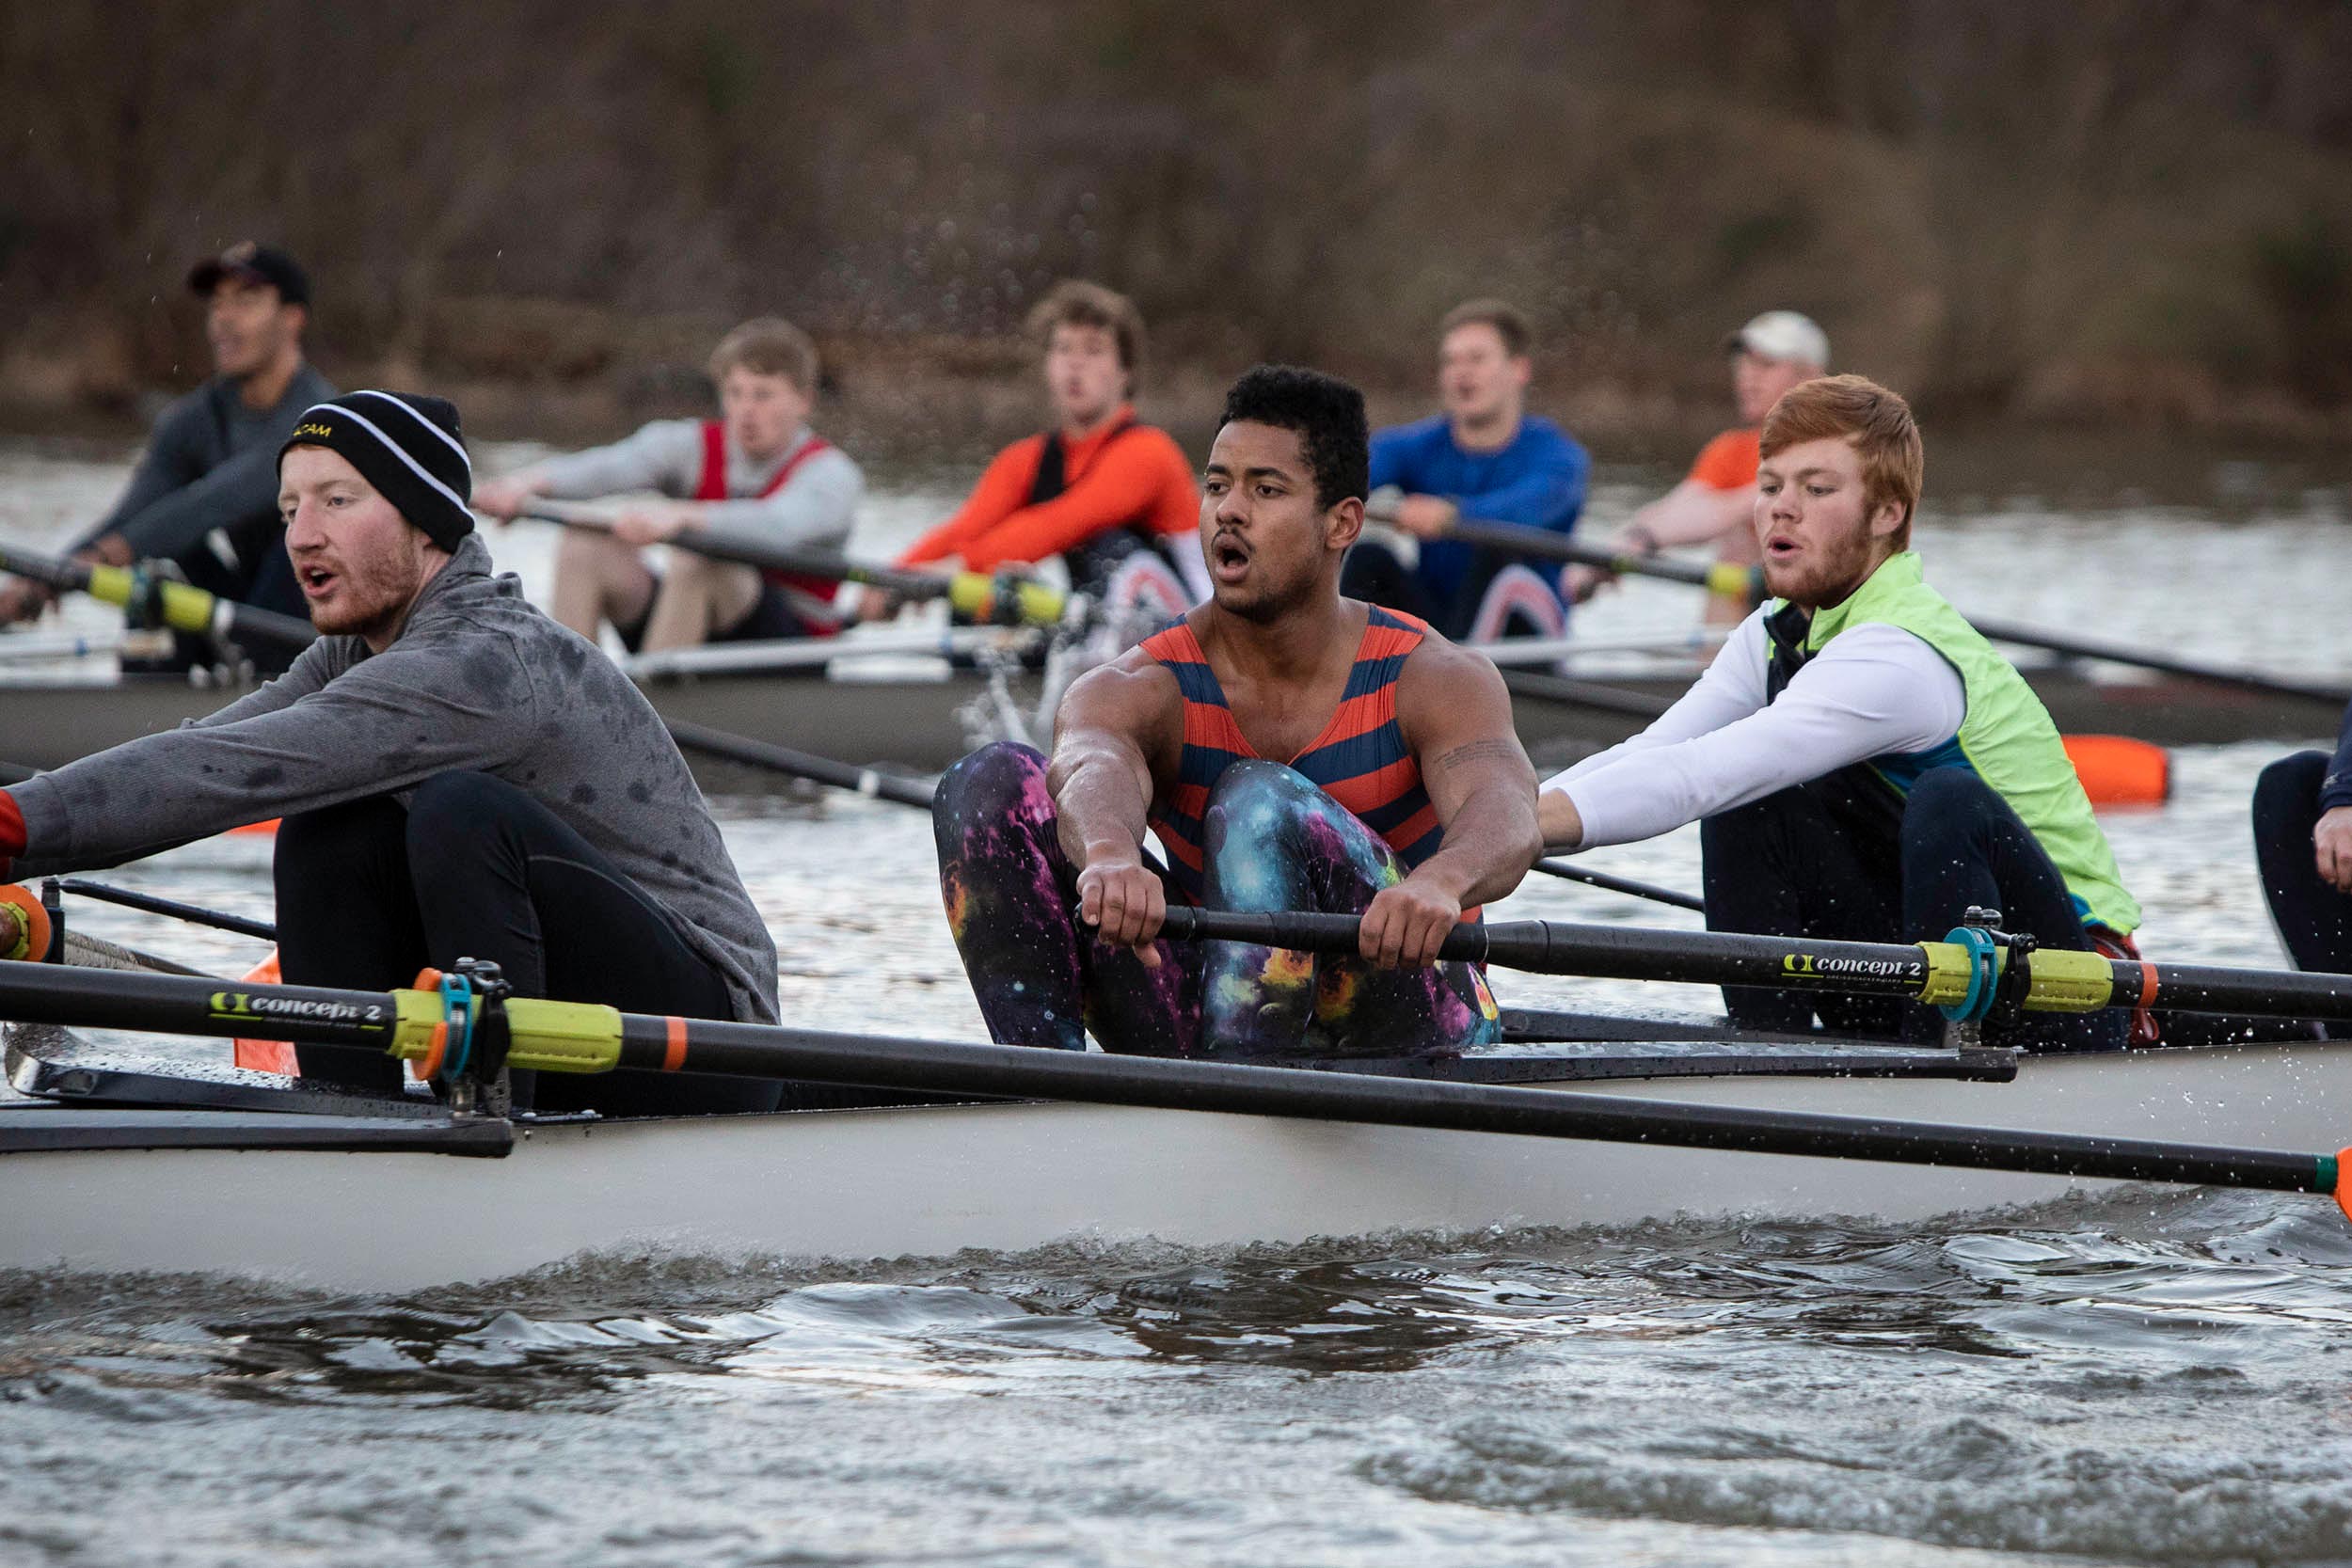 In addition to his schoolwork and his activism, Burris found time to row for UVA’s men’s rowing club. “I like having a purpose,” he said.